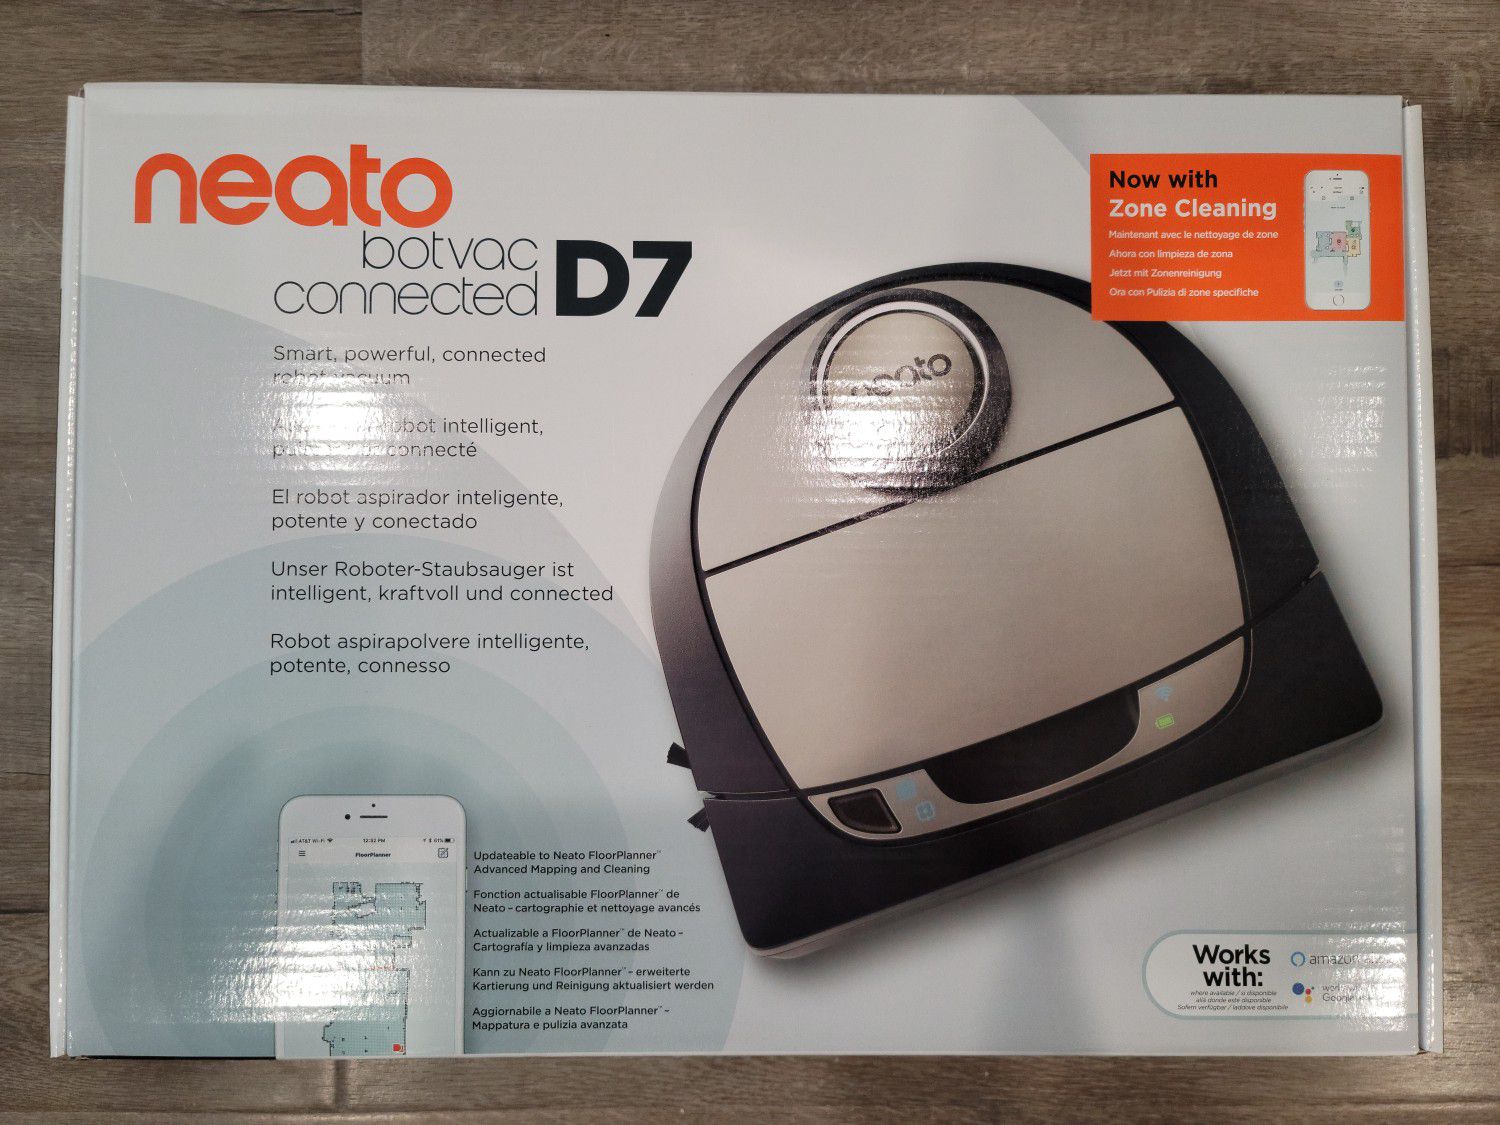 BRAND NEW Neato D7 Connected Laser-Guided Robot Vacuum